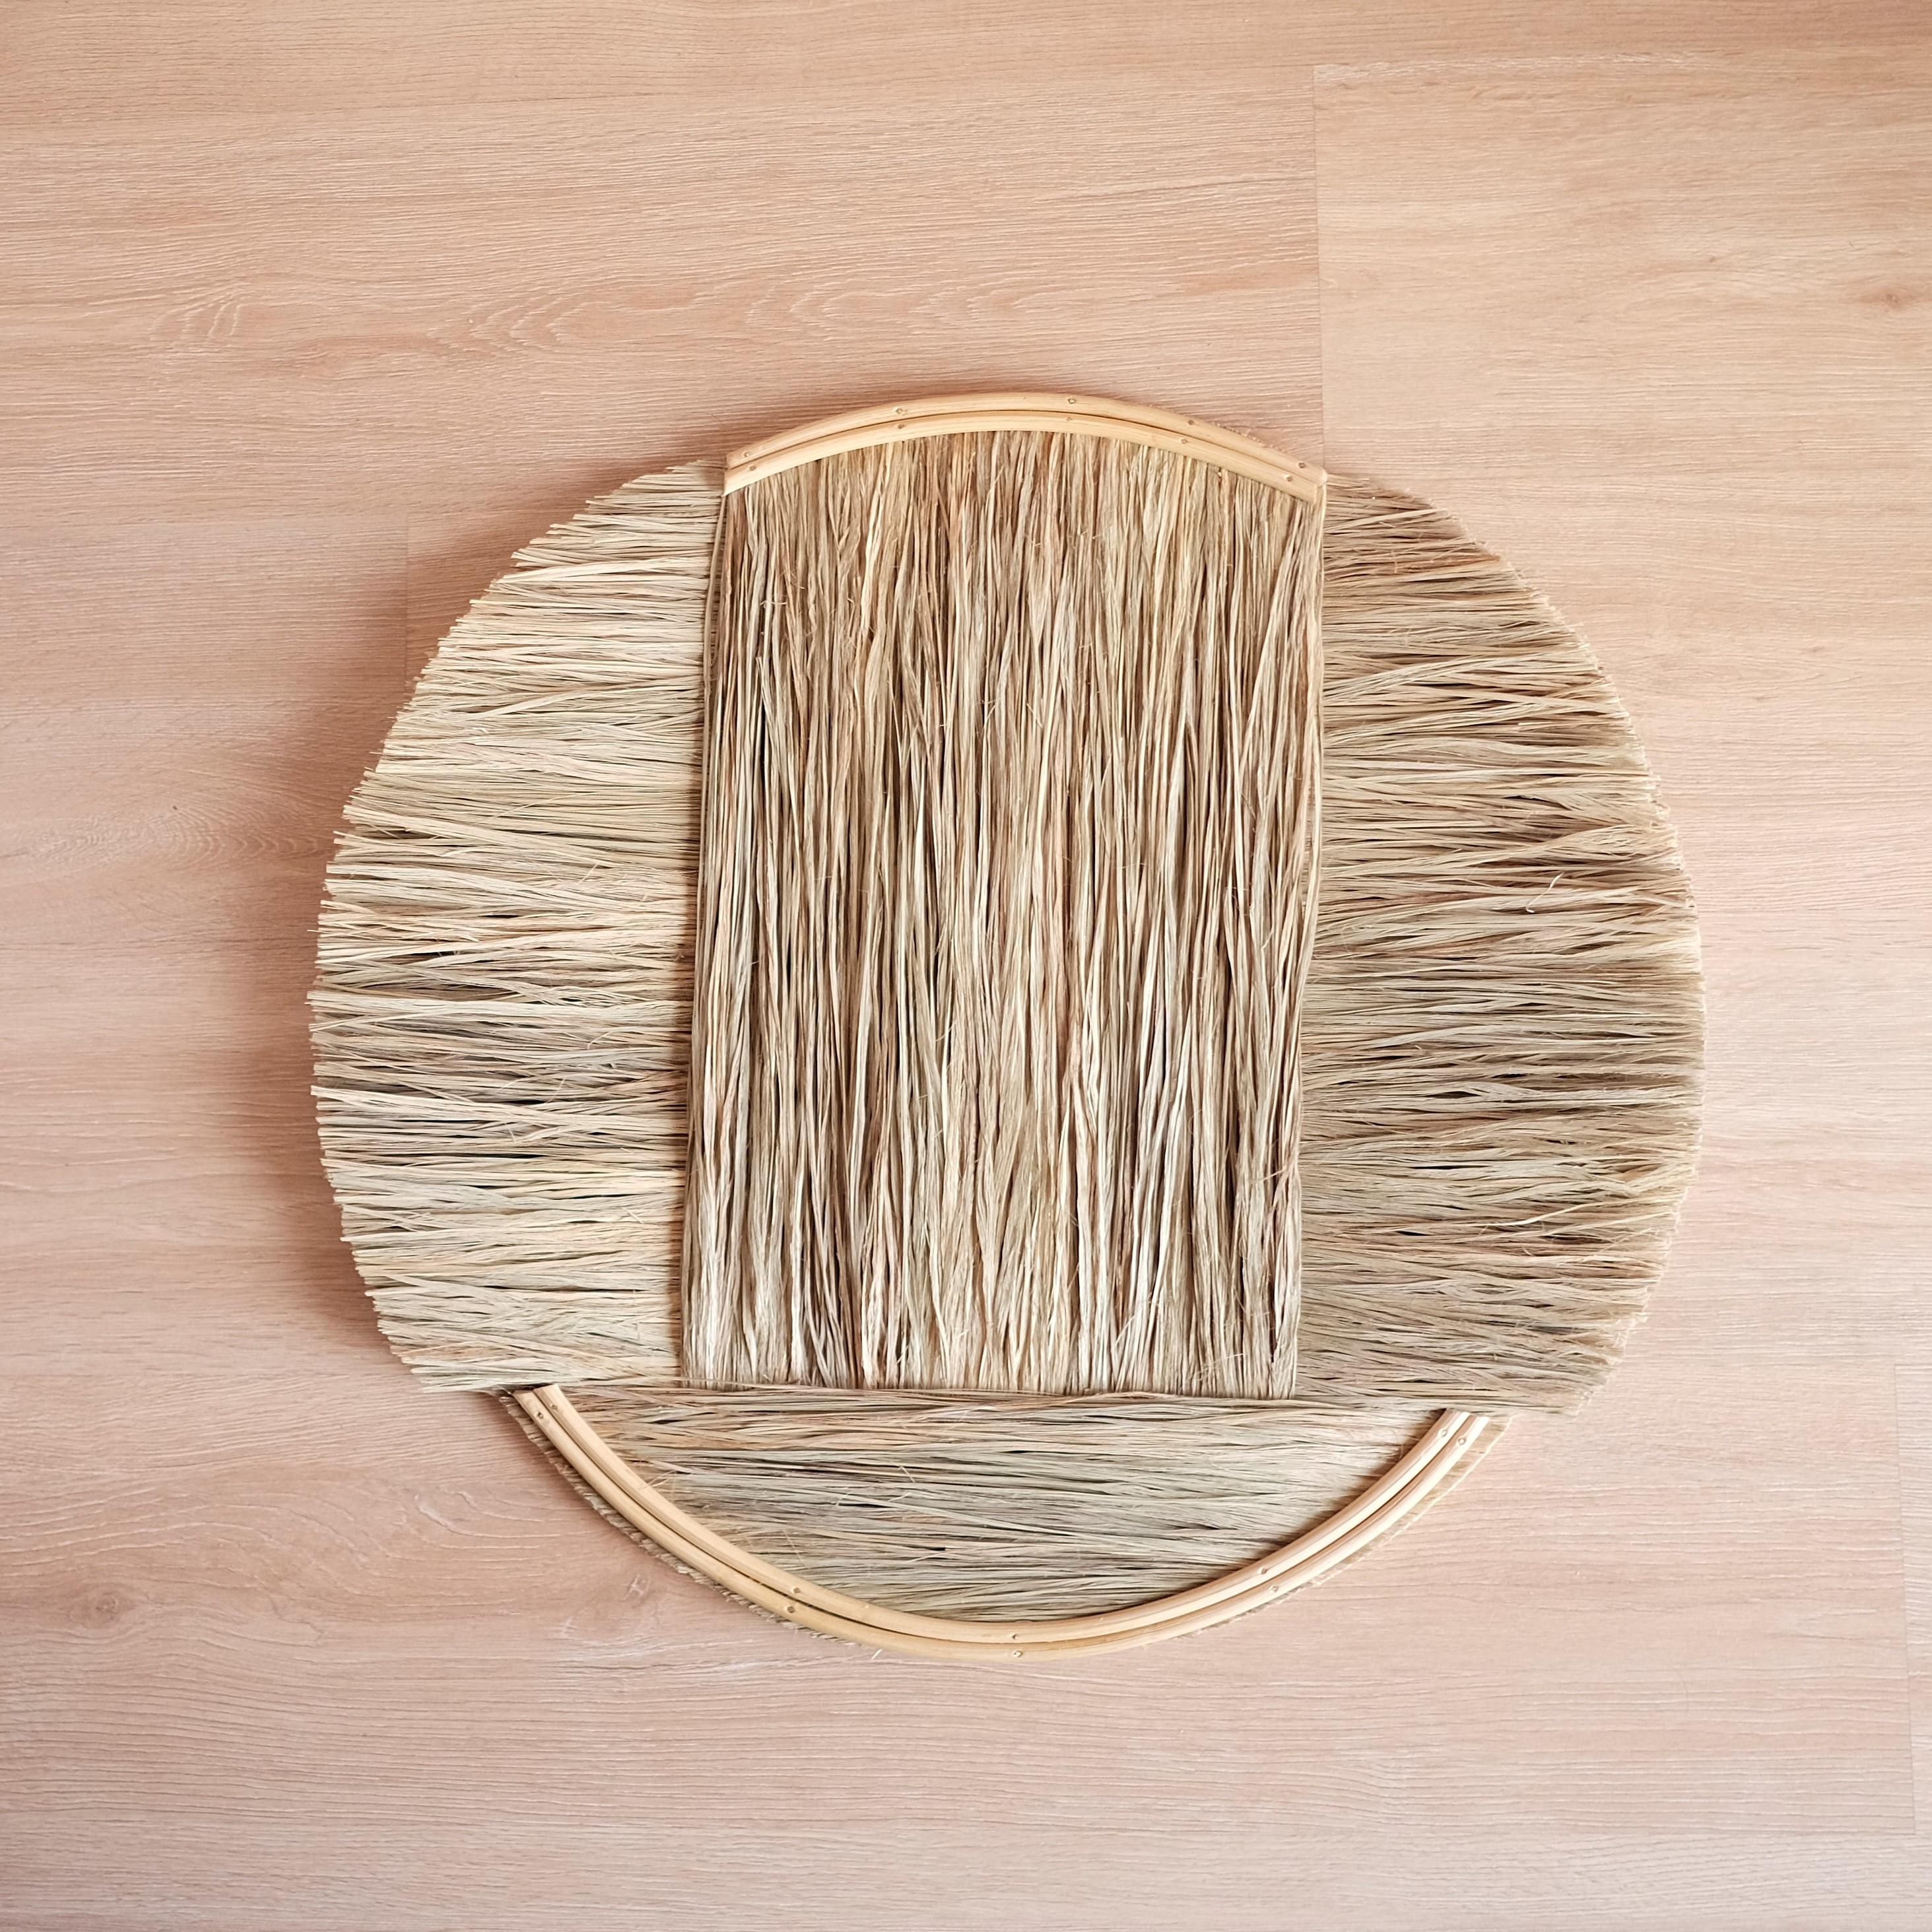 An organic modern abstract wall Decorative artwork handcrafted in Spain by Gabriela De Sagamrinaga. 

It combines vertical and horizontal overlapped esparto grass patterns partially encircling the figure. The fibers transcend the limits of its